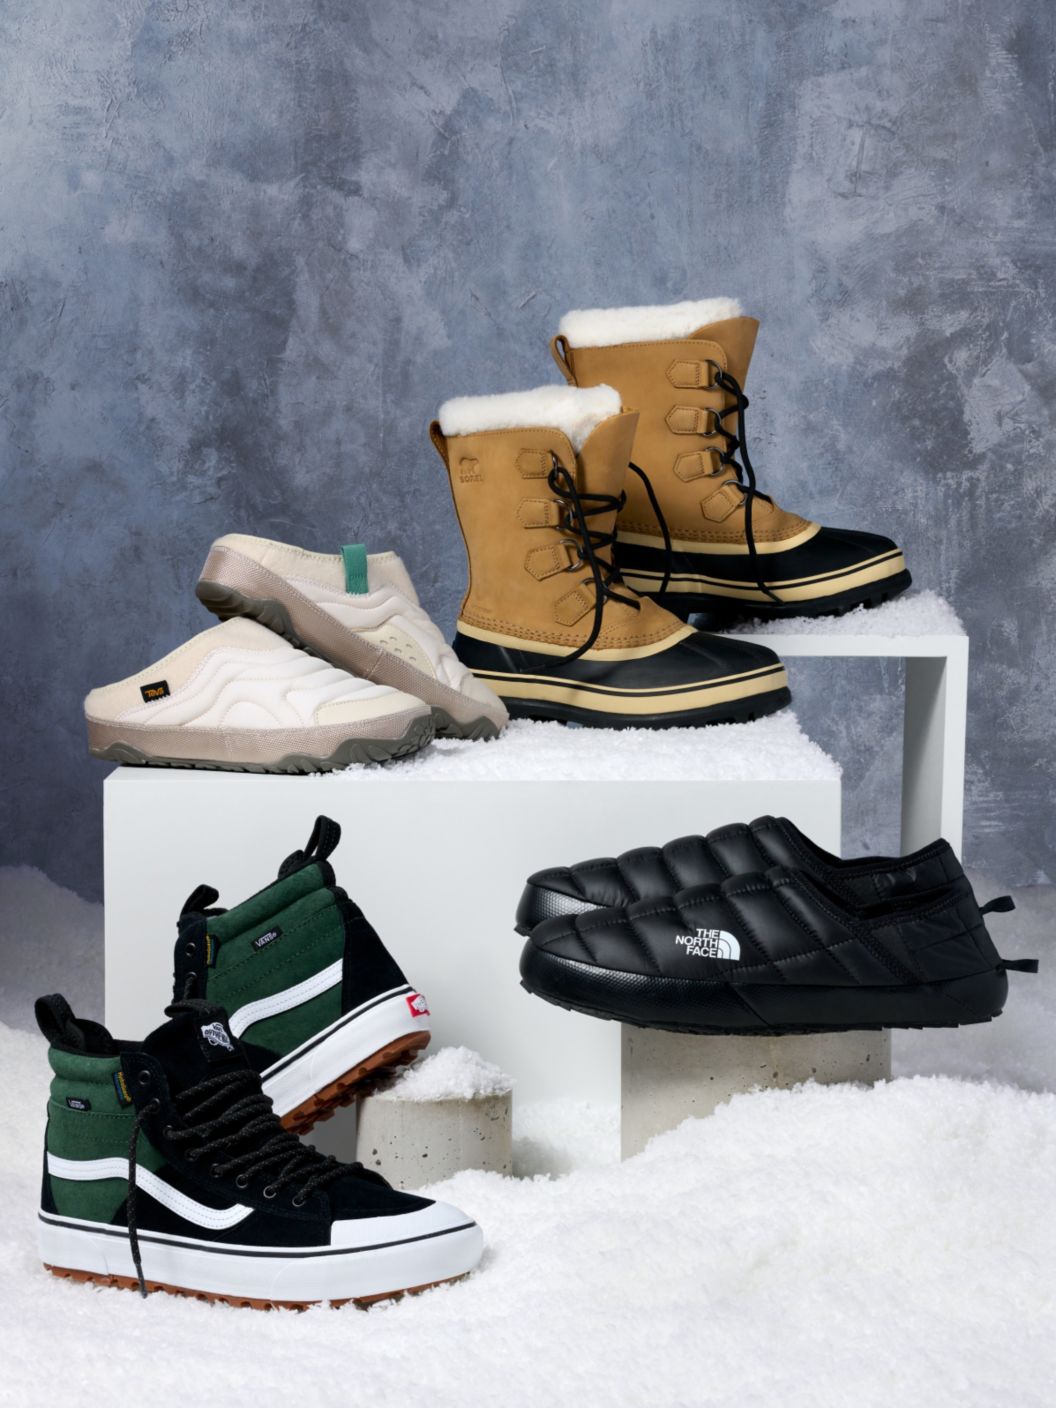 All-terrain slippers and snow boots from Vans, The North Face, Teva & Sorel. 